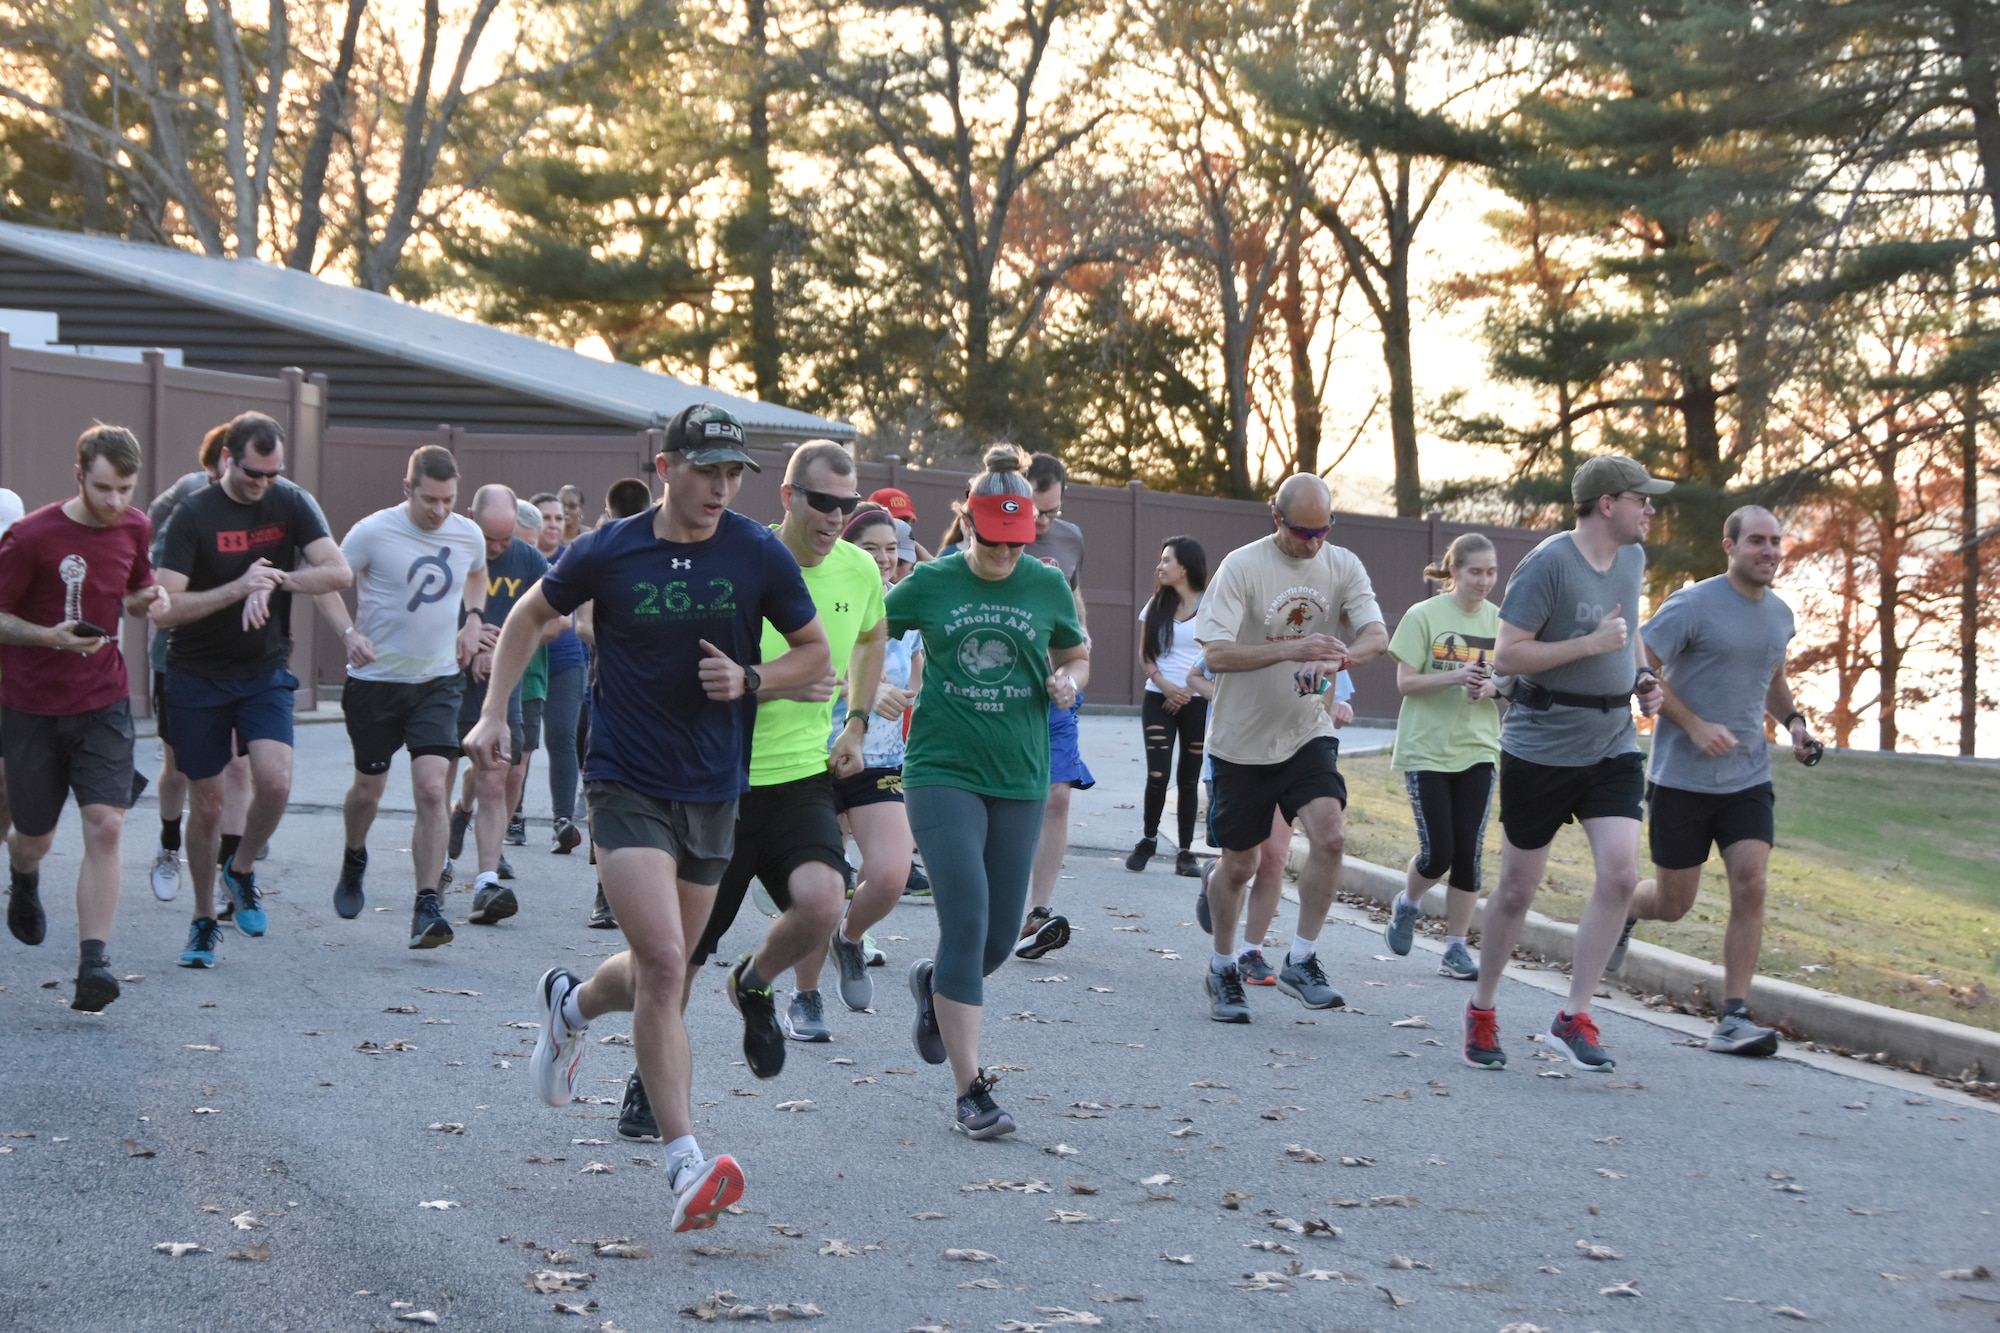 AEDC Turkey Trot draws dozens of participants looking for some pre